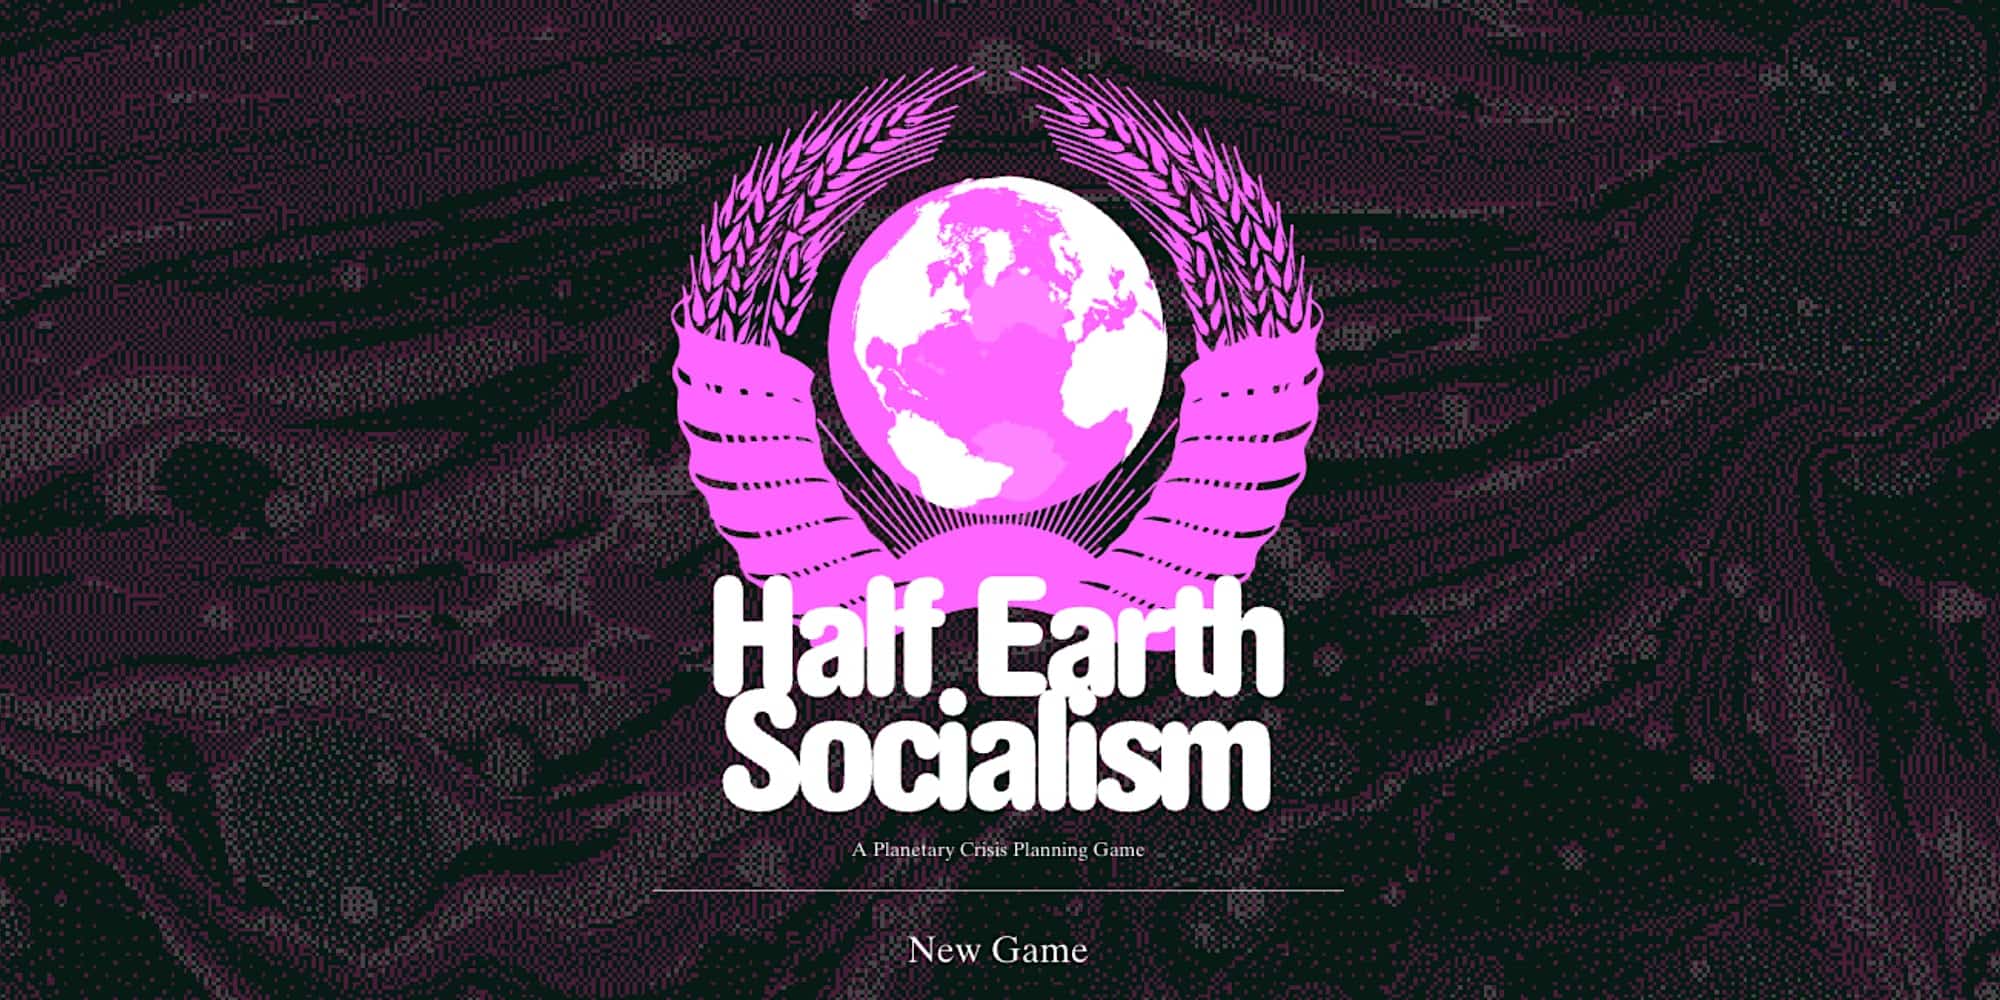 Book cover reads: 'Half-Earth Socialism'